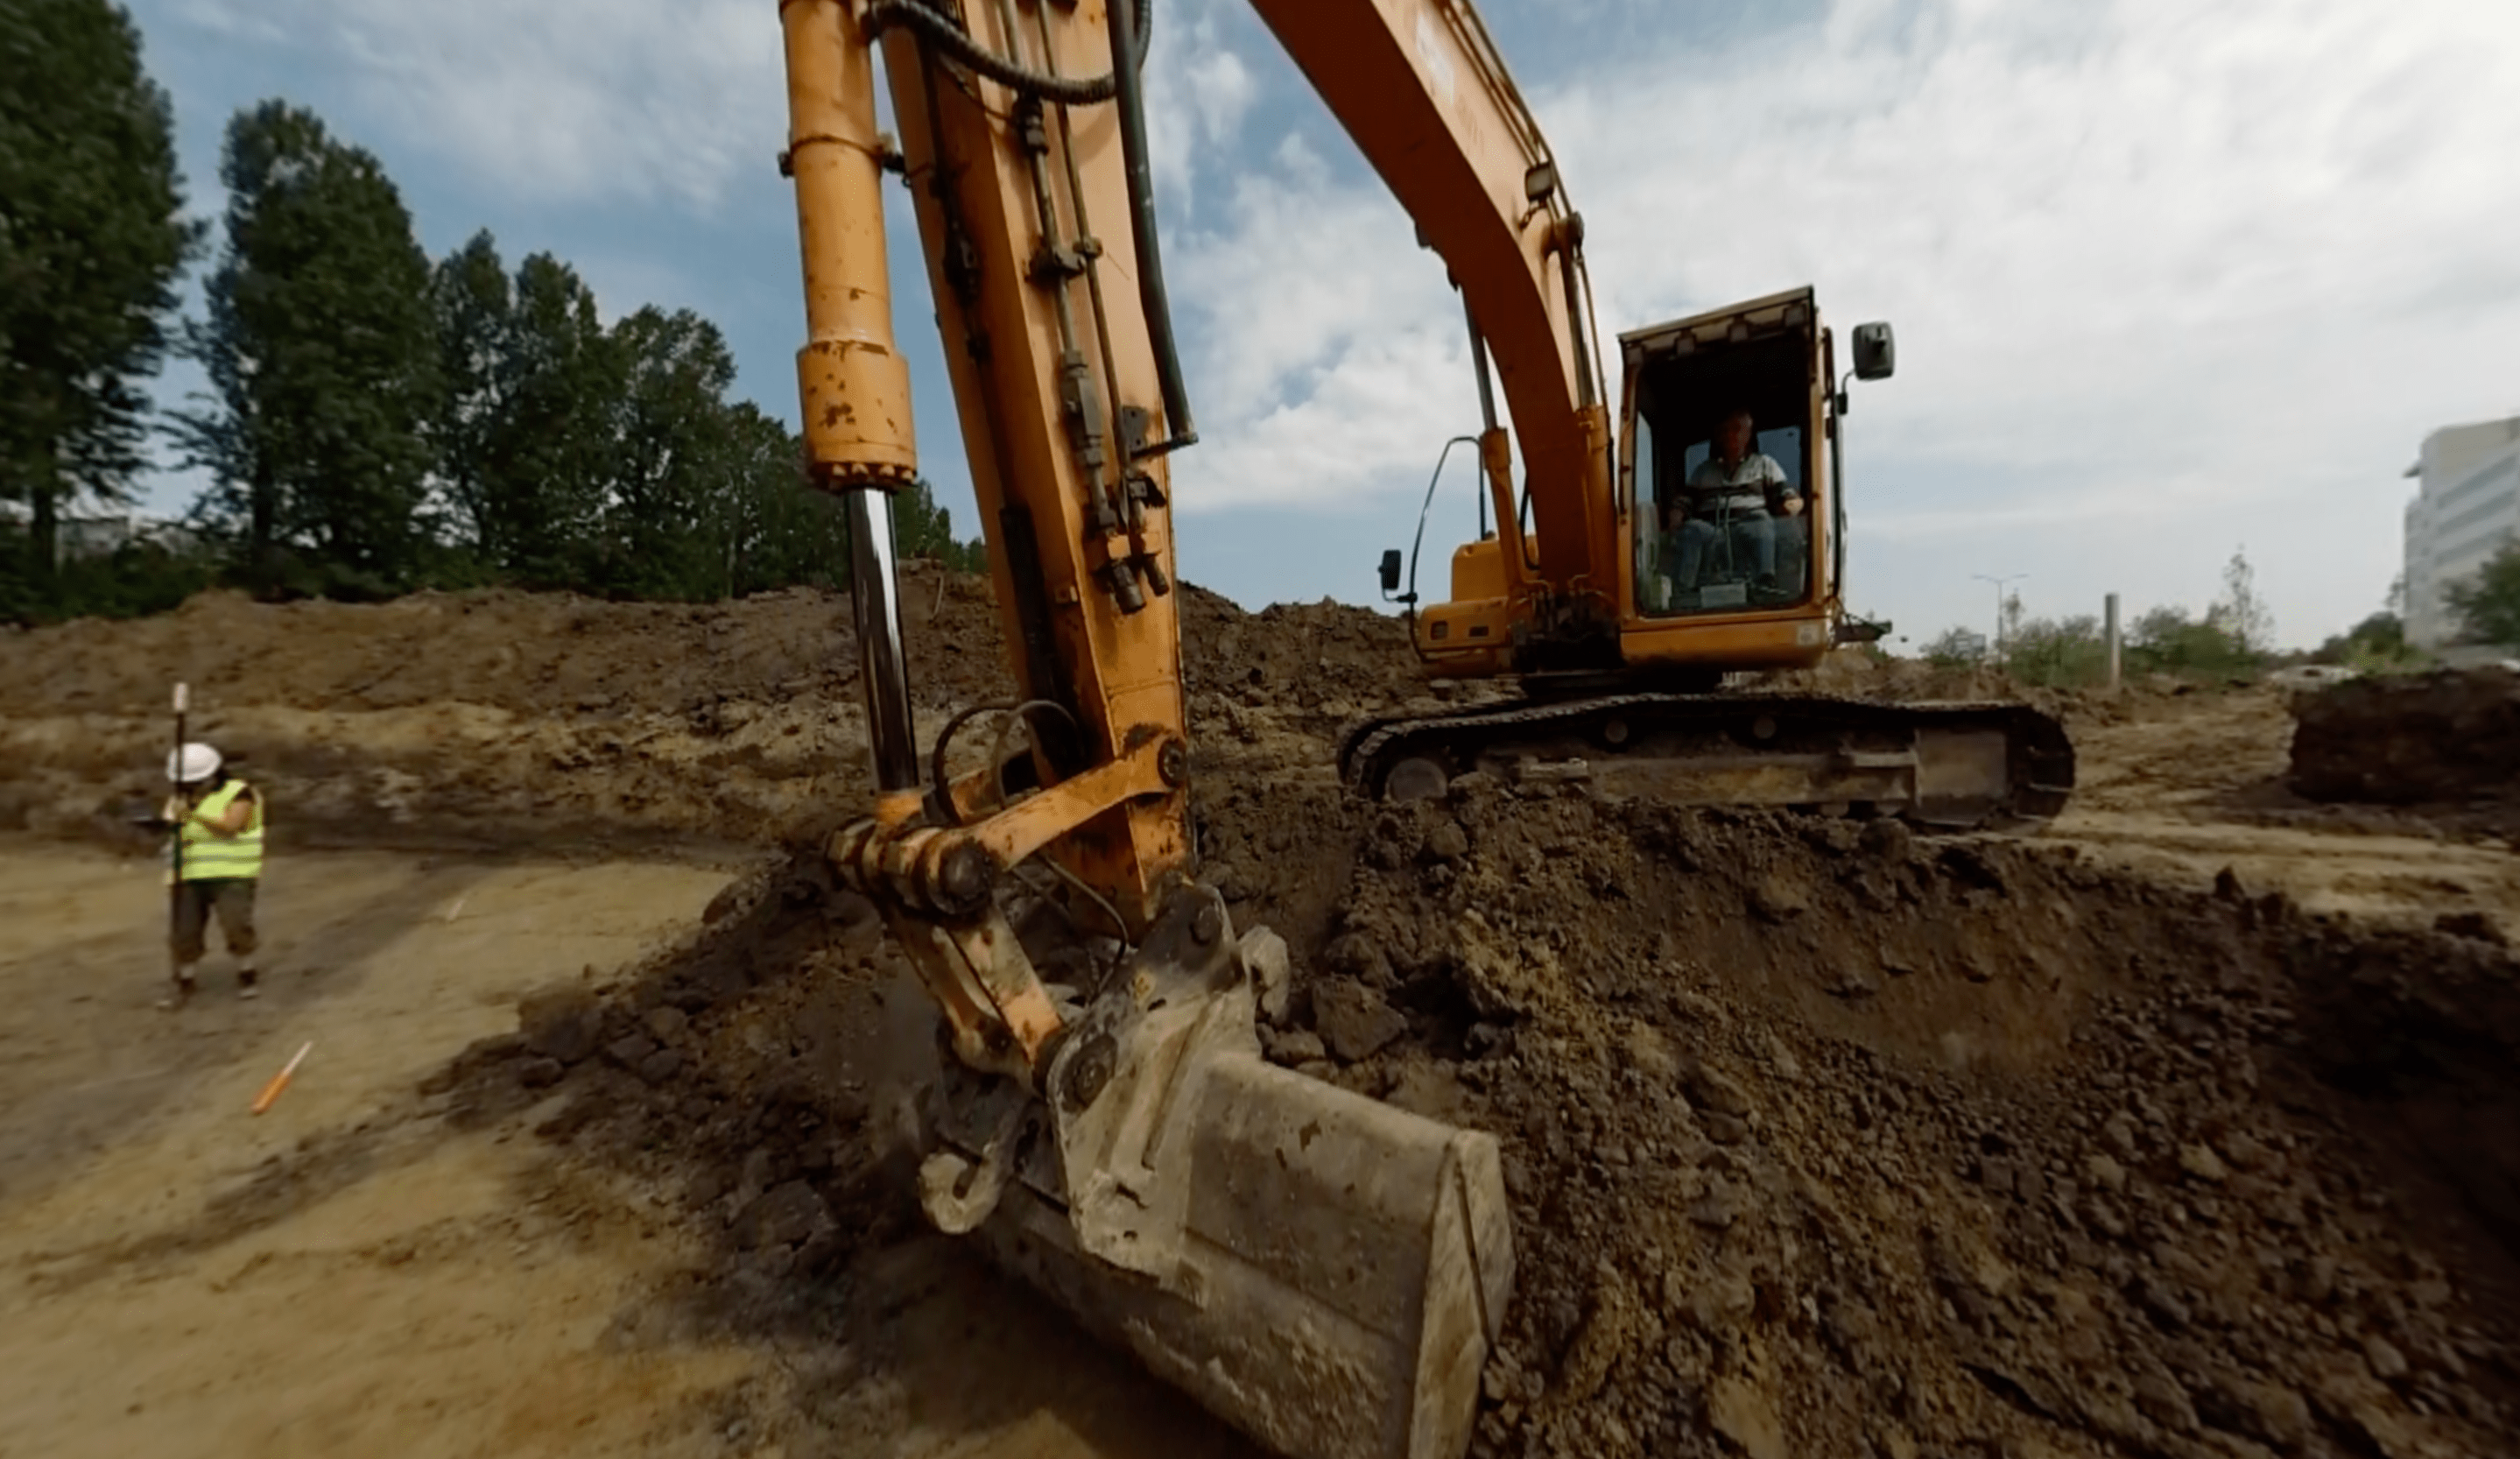 Hazardous factors are shown in the application as well such as this excavator taking care of taking of another layer of soil from the trench.